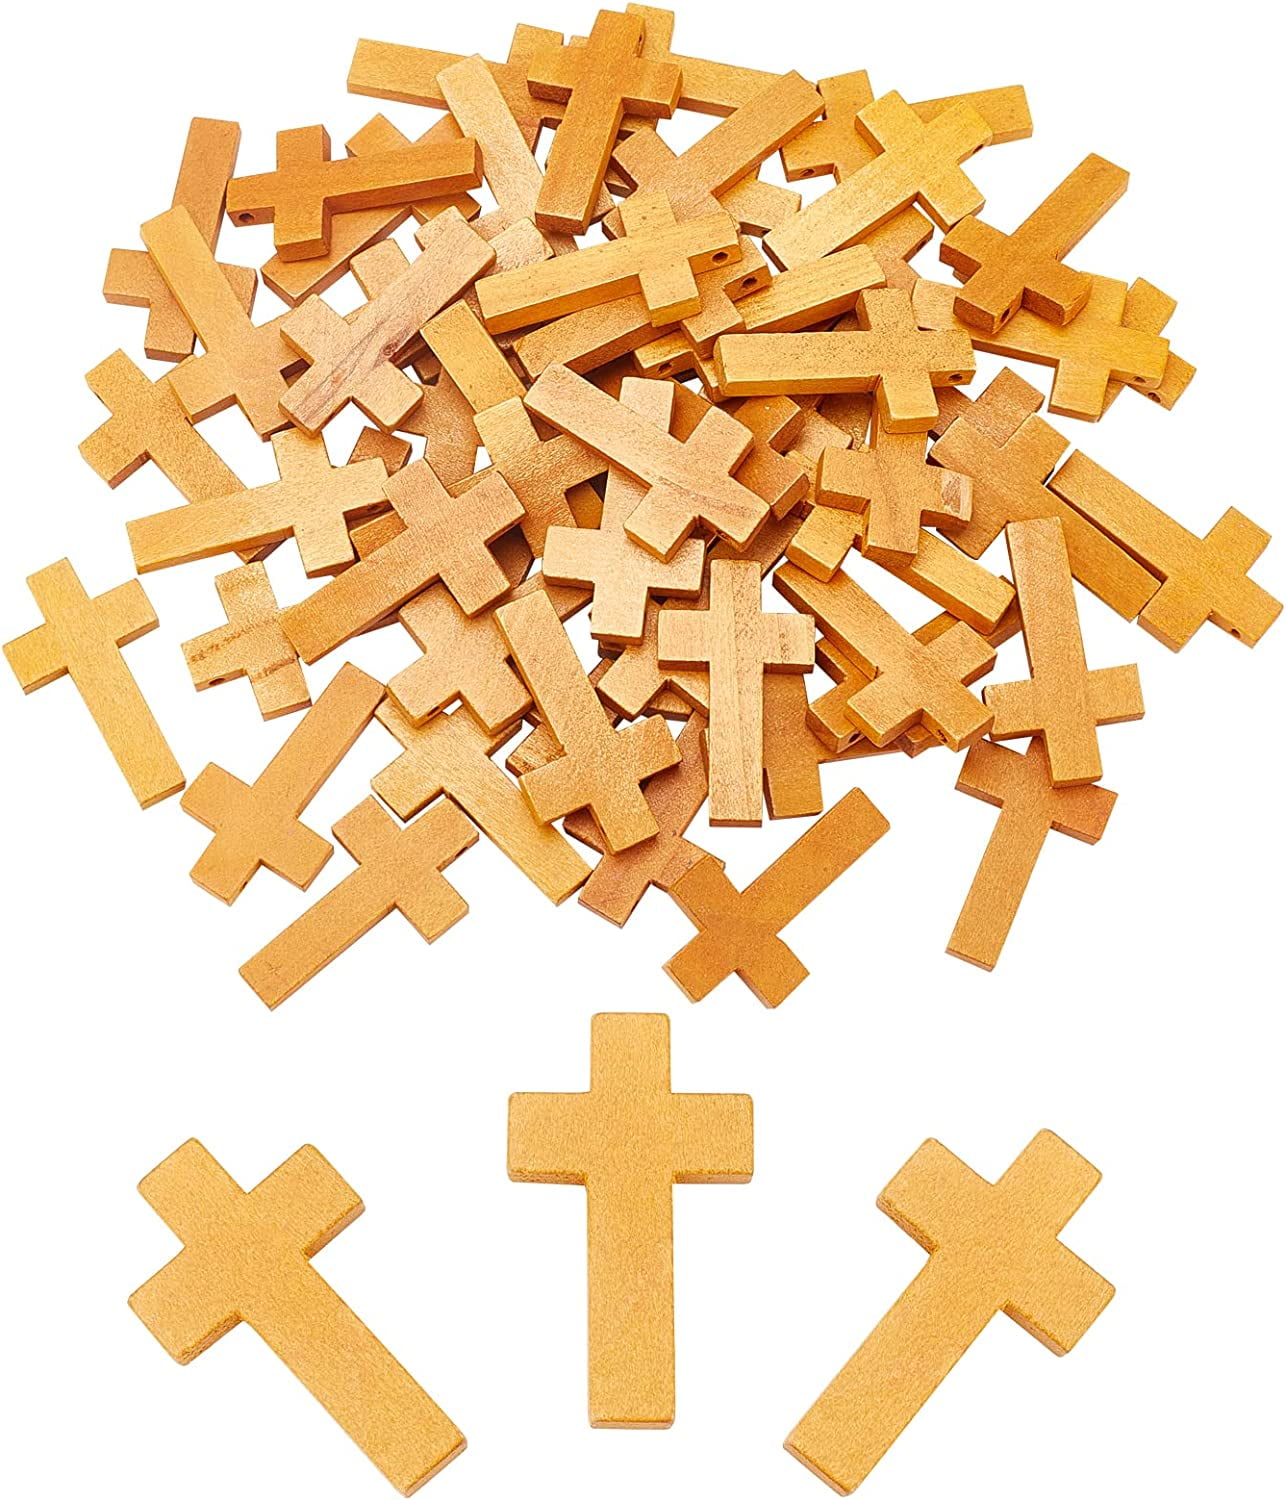 Fun-Weevz 40 Assorted Wood Cross Pendants for Jewelry Making Adults, Wooden  Crosses for Crafts, 2 sizes Pocket Crosses in Bulk, Cross Charms for